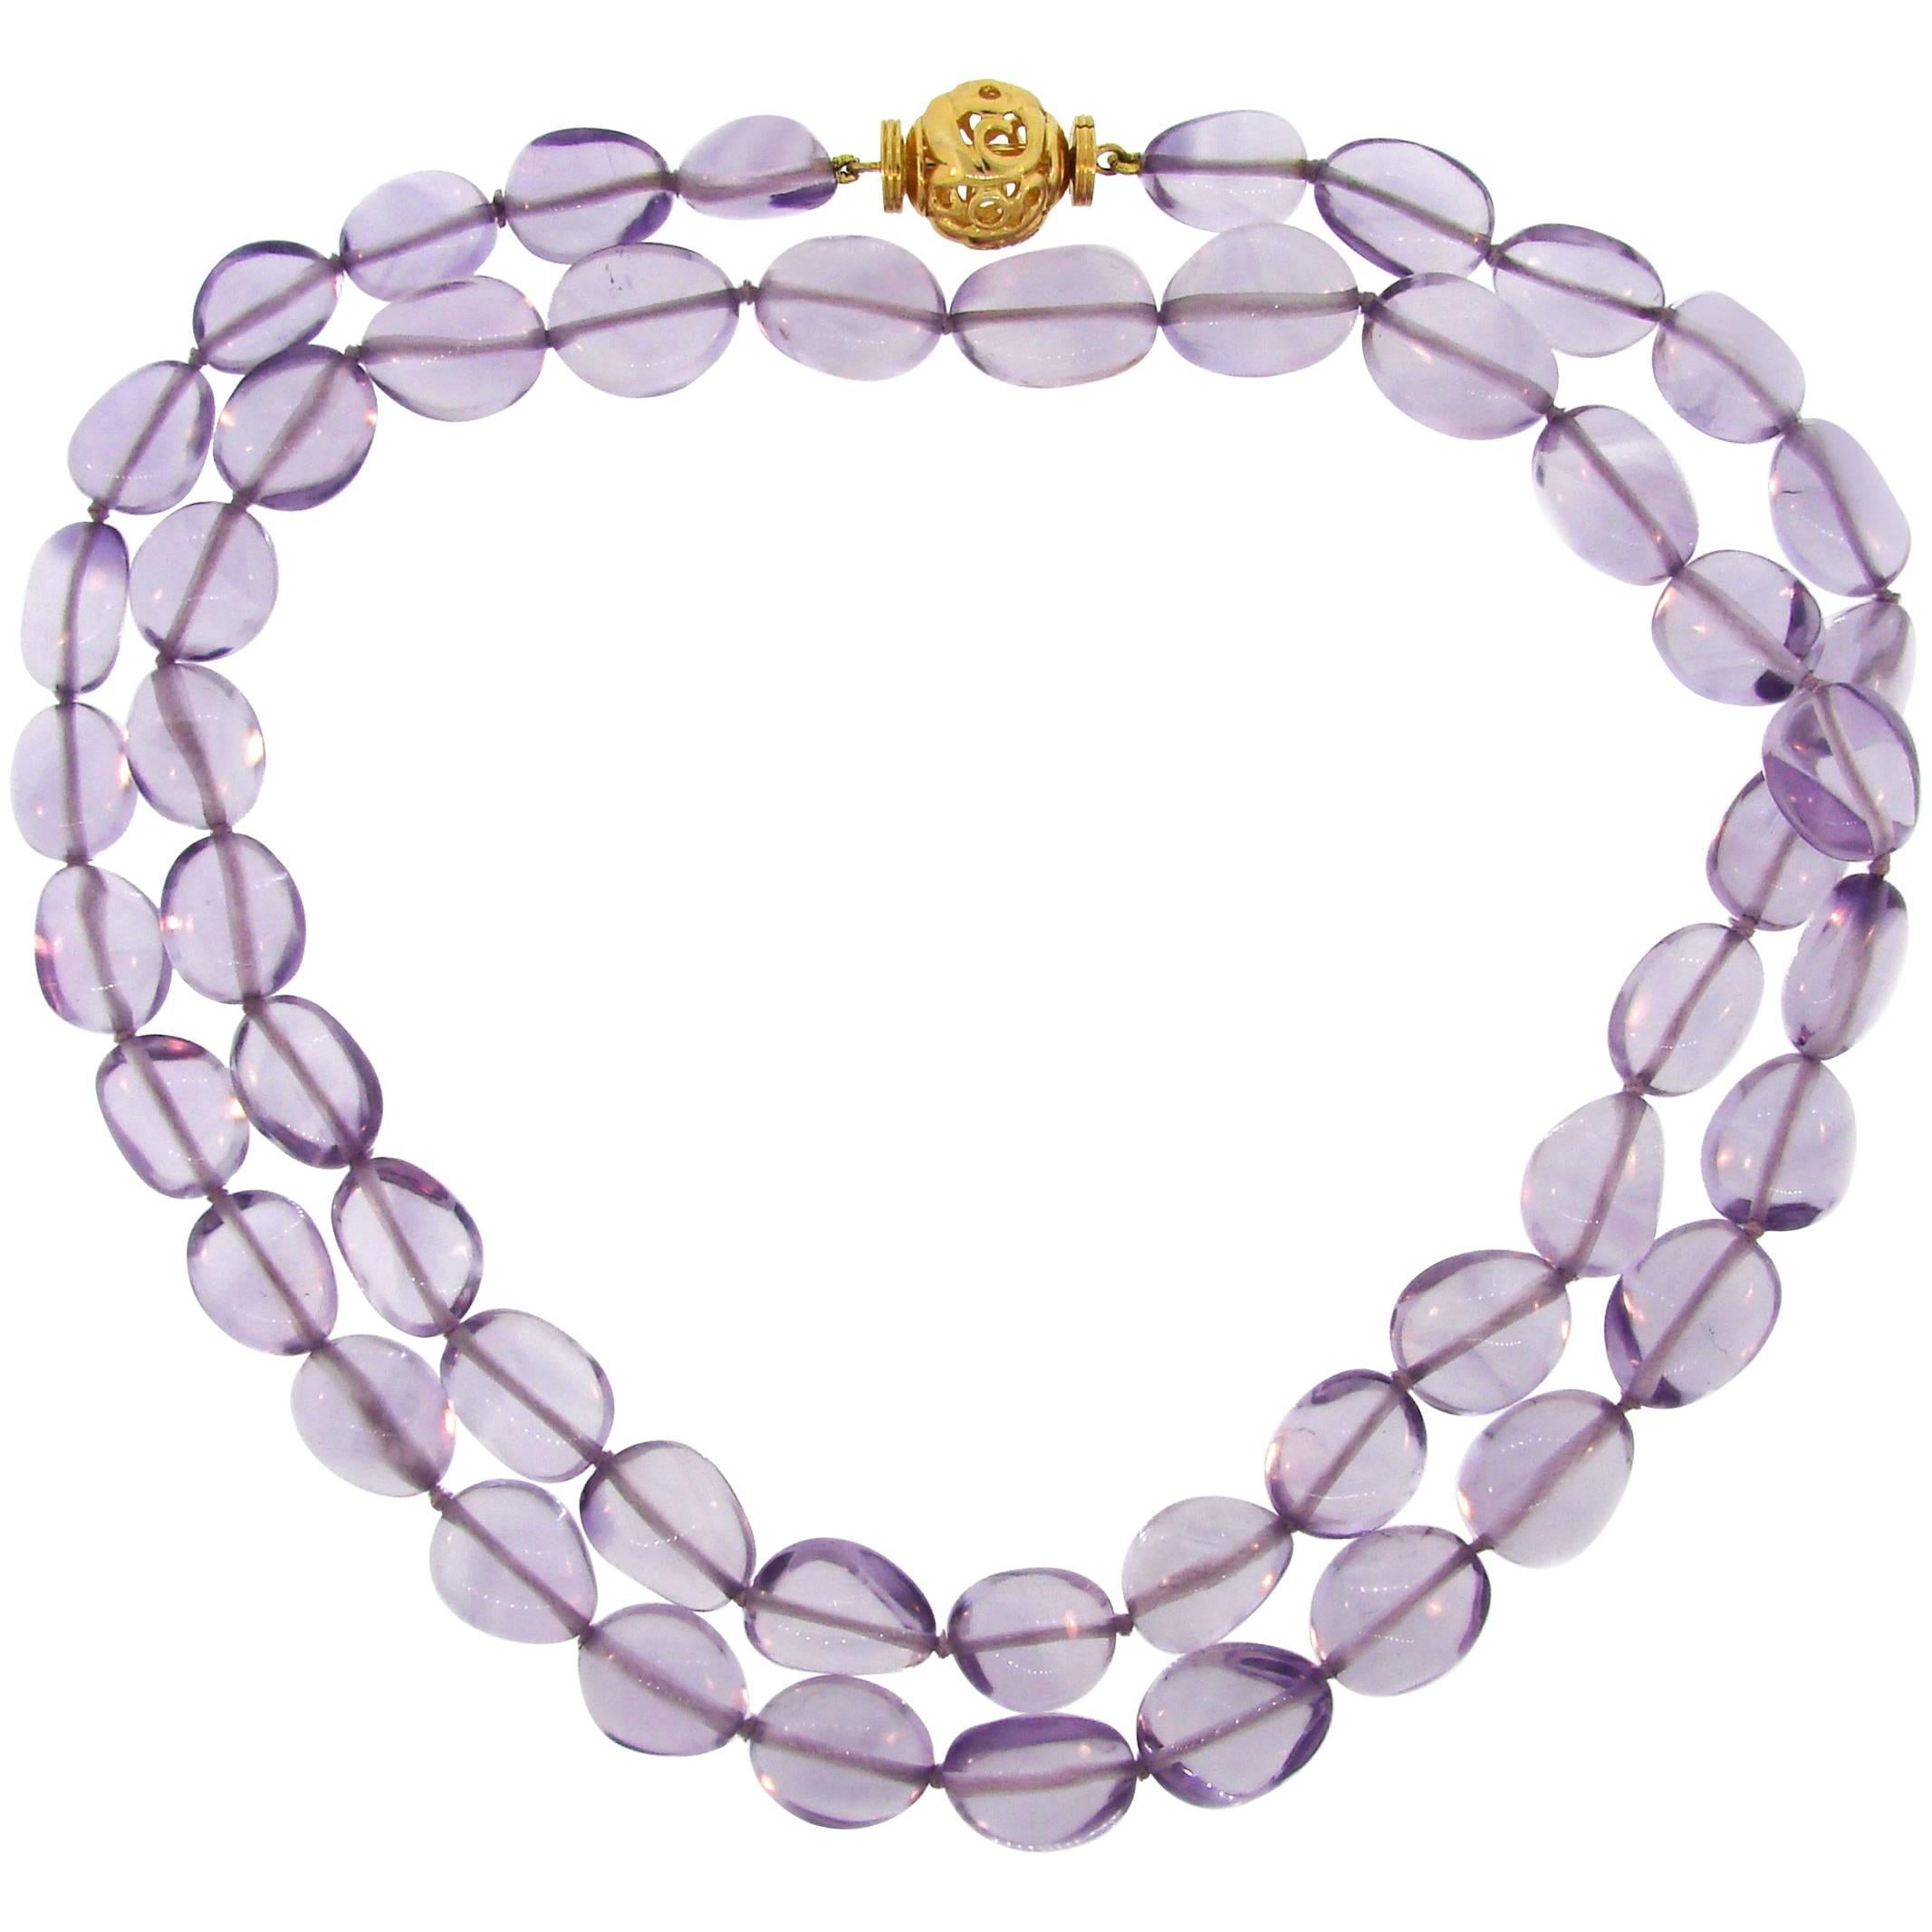 Verdura Amethyst Bead Strand Necklace with Yellow Gold Clasp